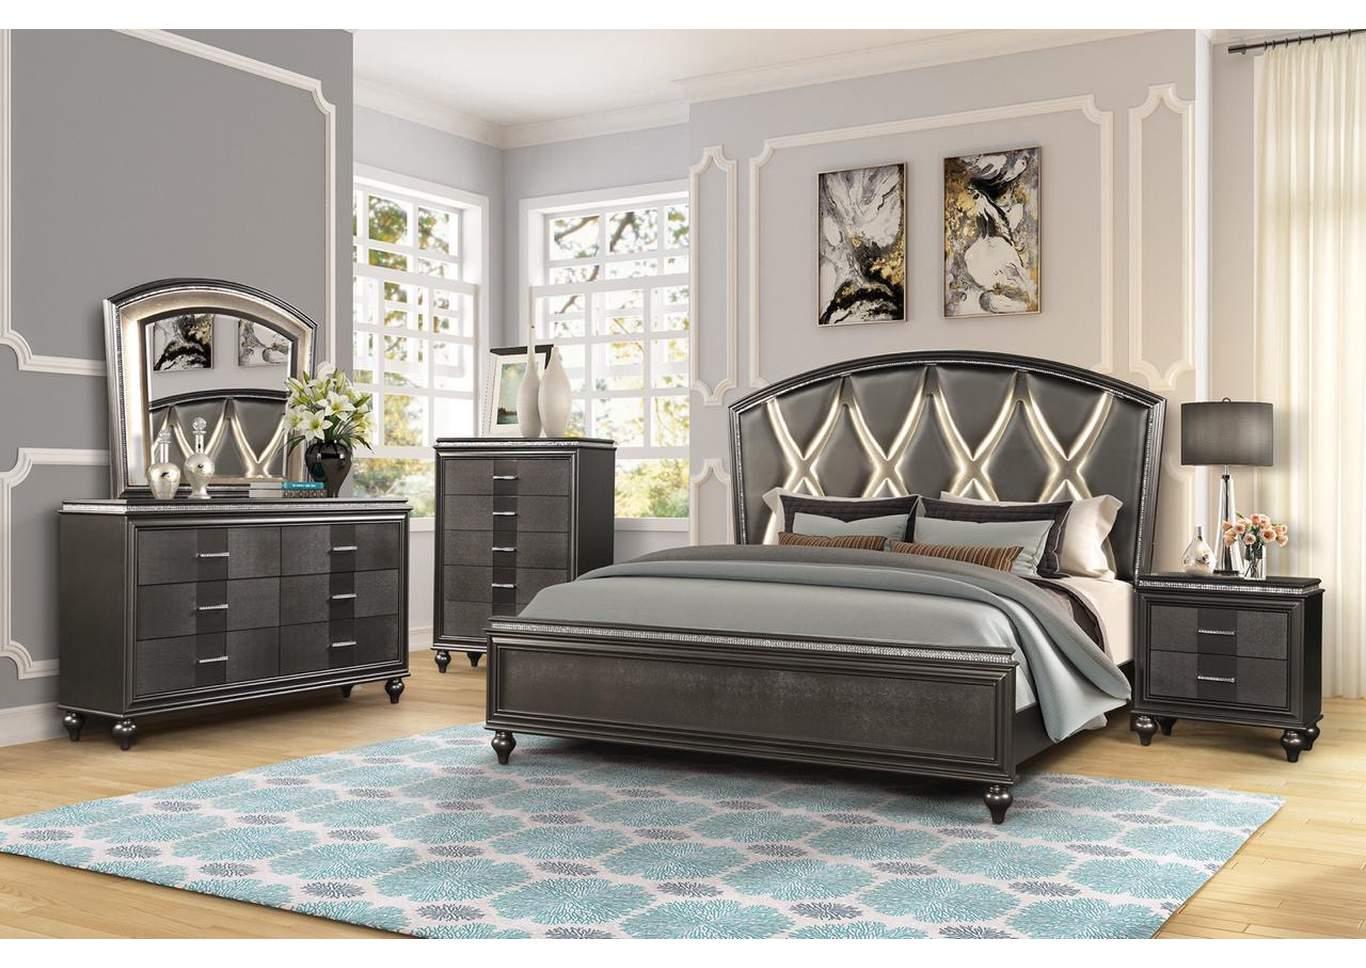 Contemporary, Modern Panel Bedroom Set GINGER GHF-808857551863 in Gunmetal Eco Leather